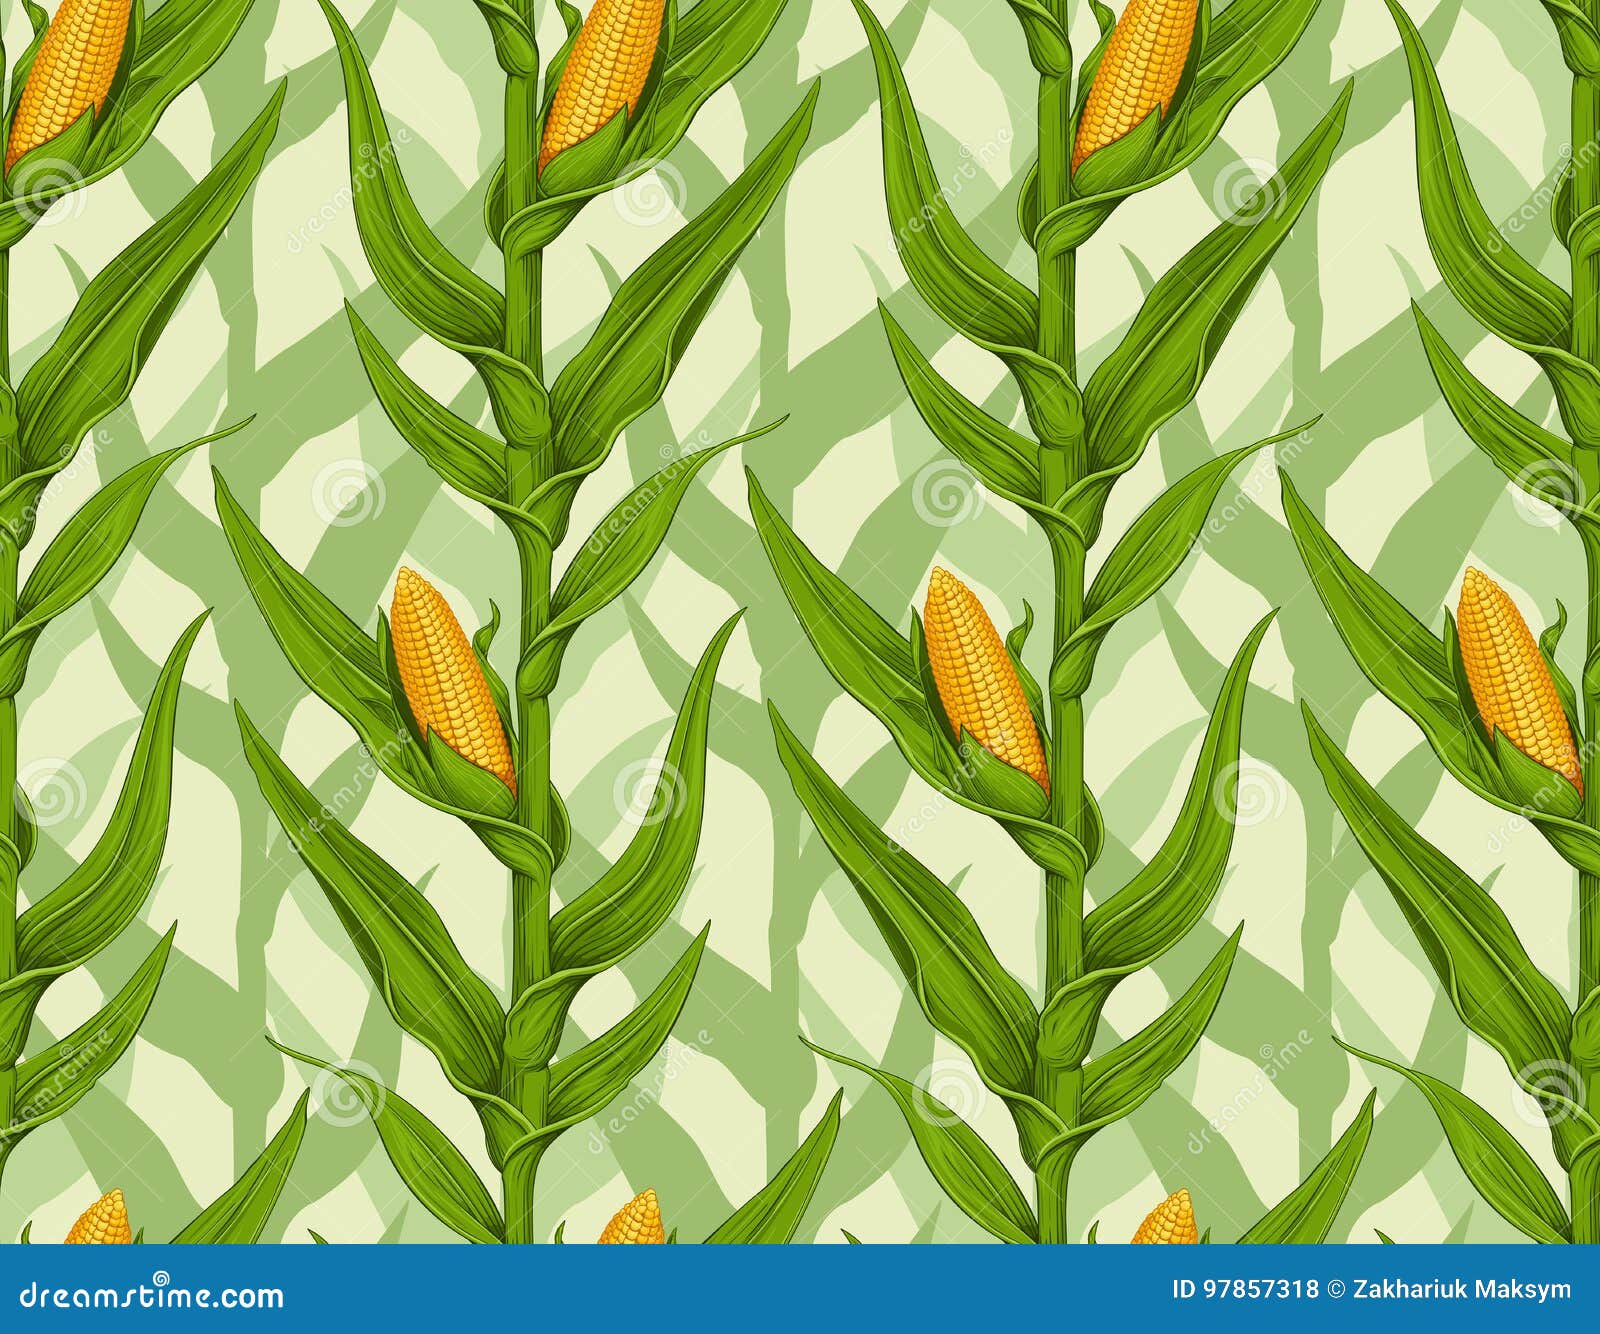 Download Corn Cartoons, Illustrations & Vector Stock Images - 51543 Pictures to download from ...